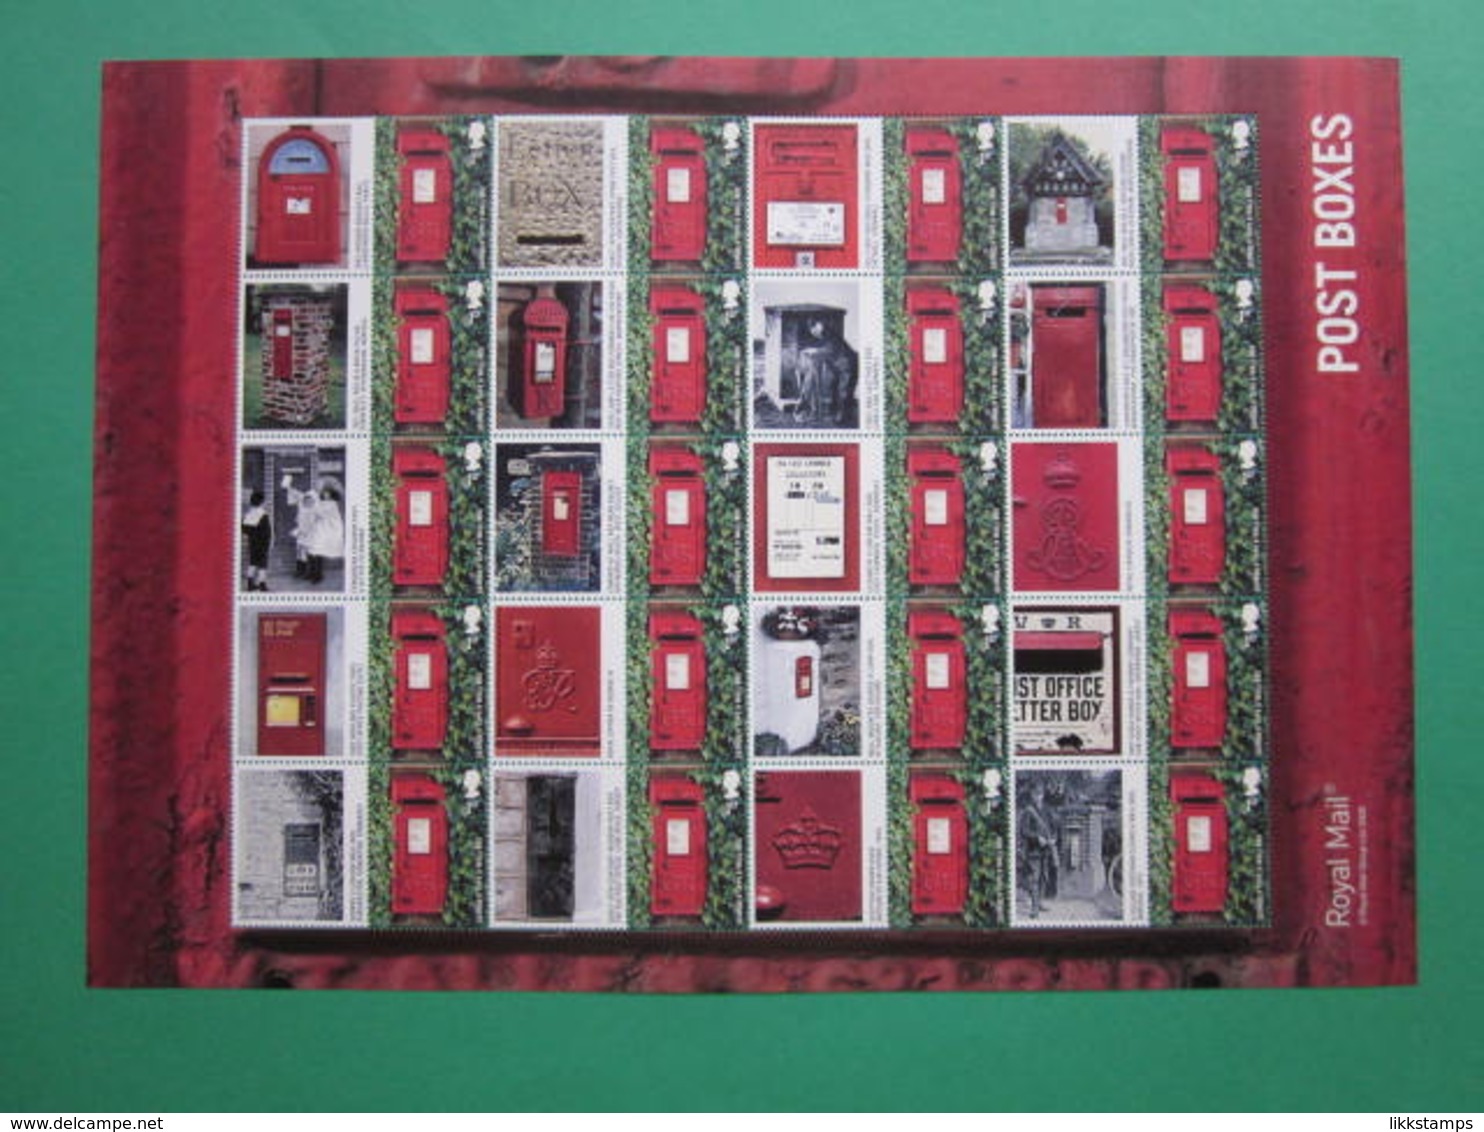 2009 ROYAL MAIL POST BOXES GENERIC SMILERS SHEET. #SS0063 - Smilers Sheets